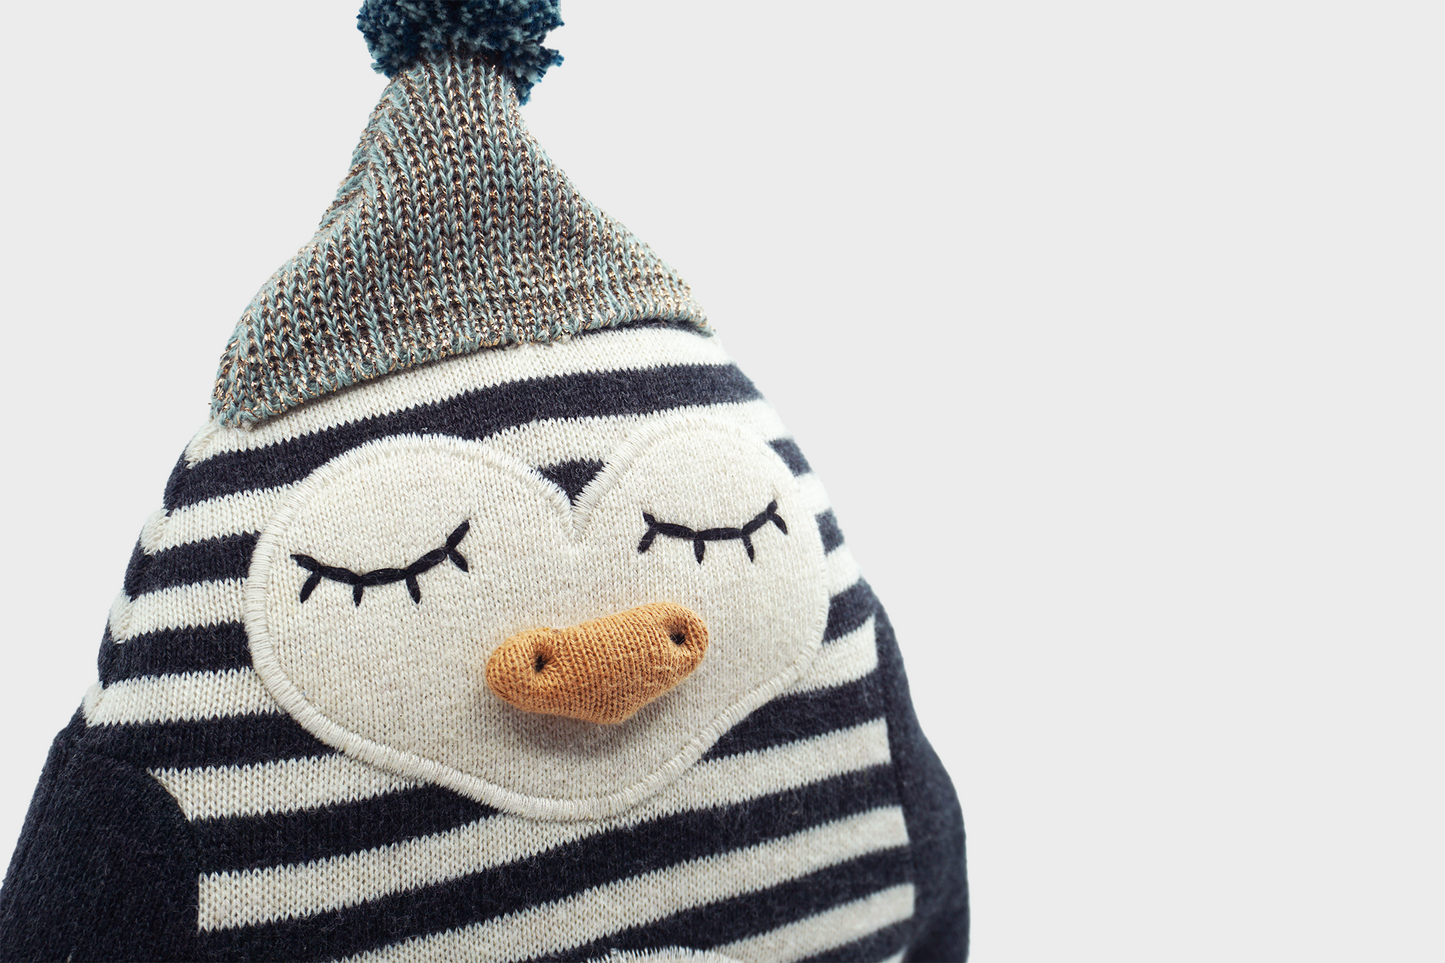 Small striped penguin stuffed animal with hat close up